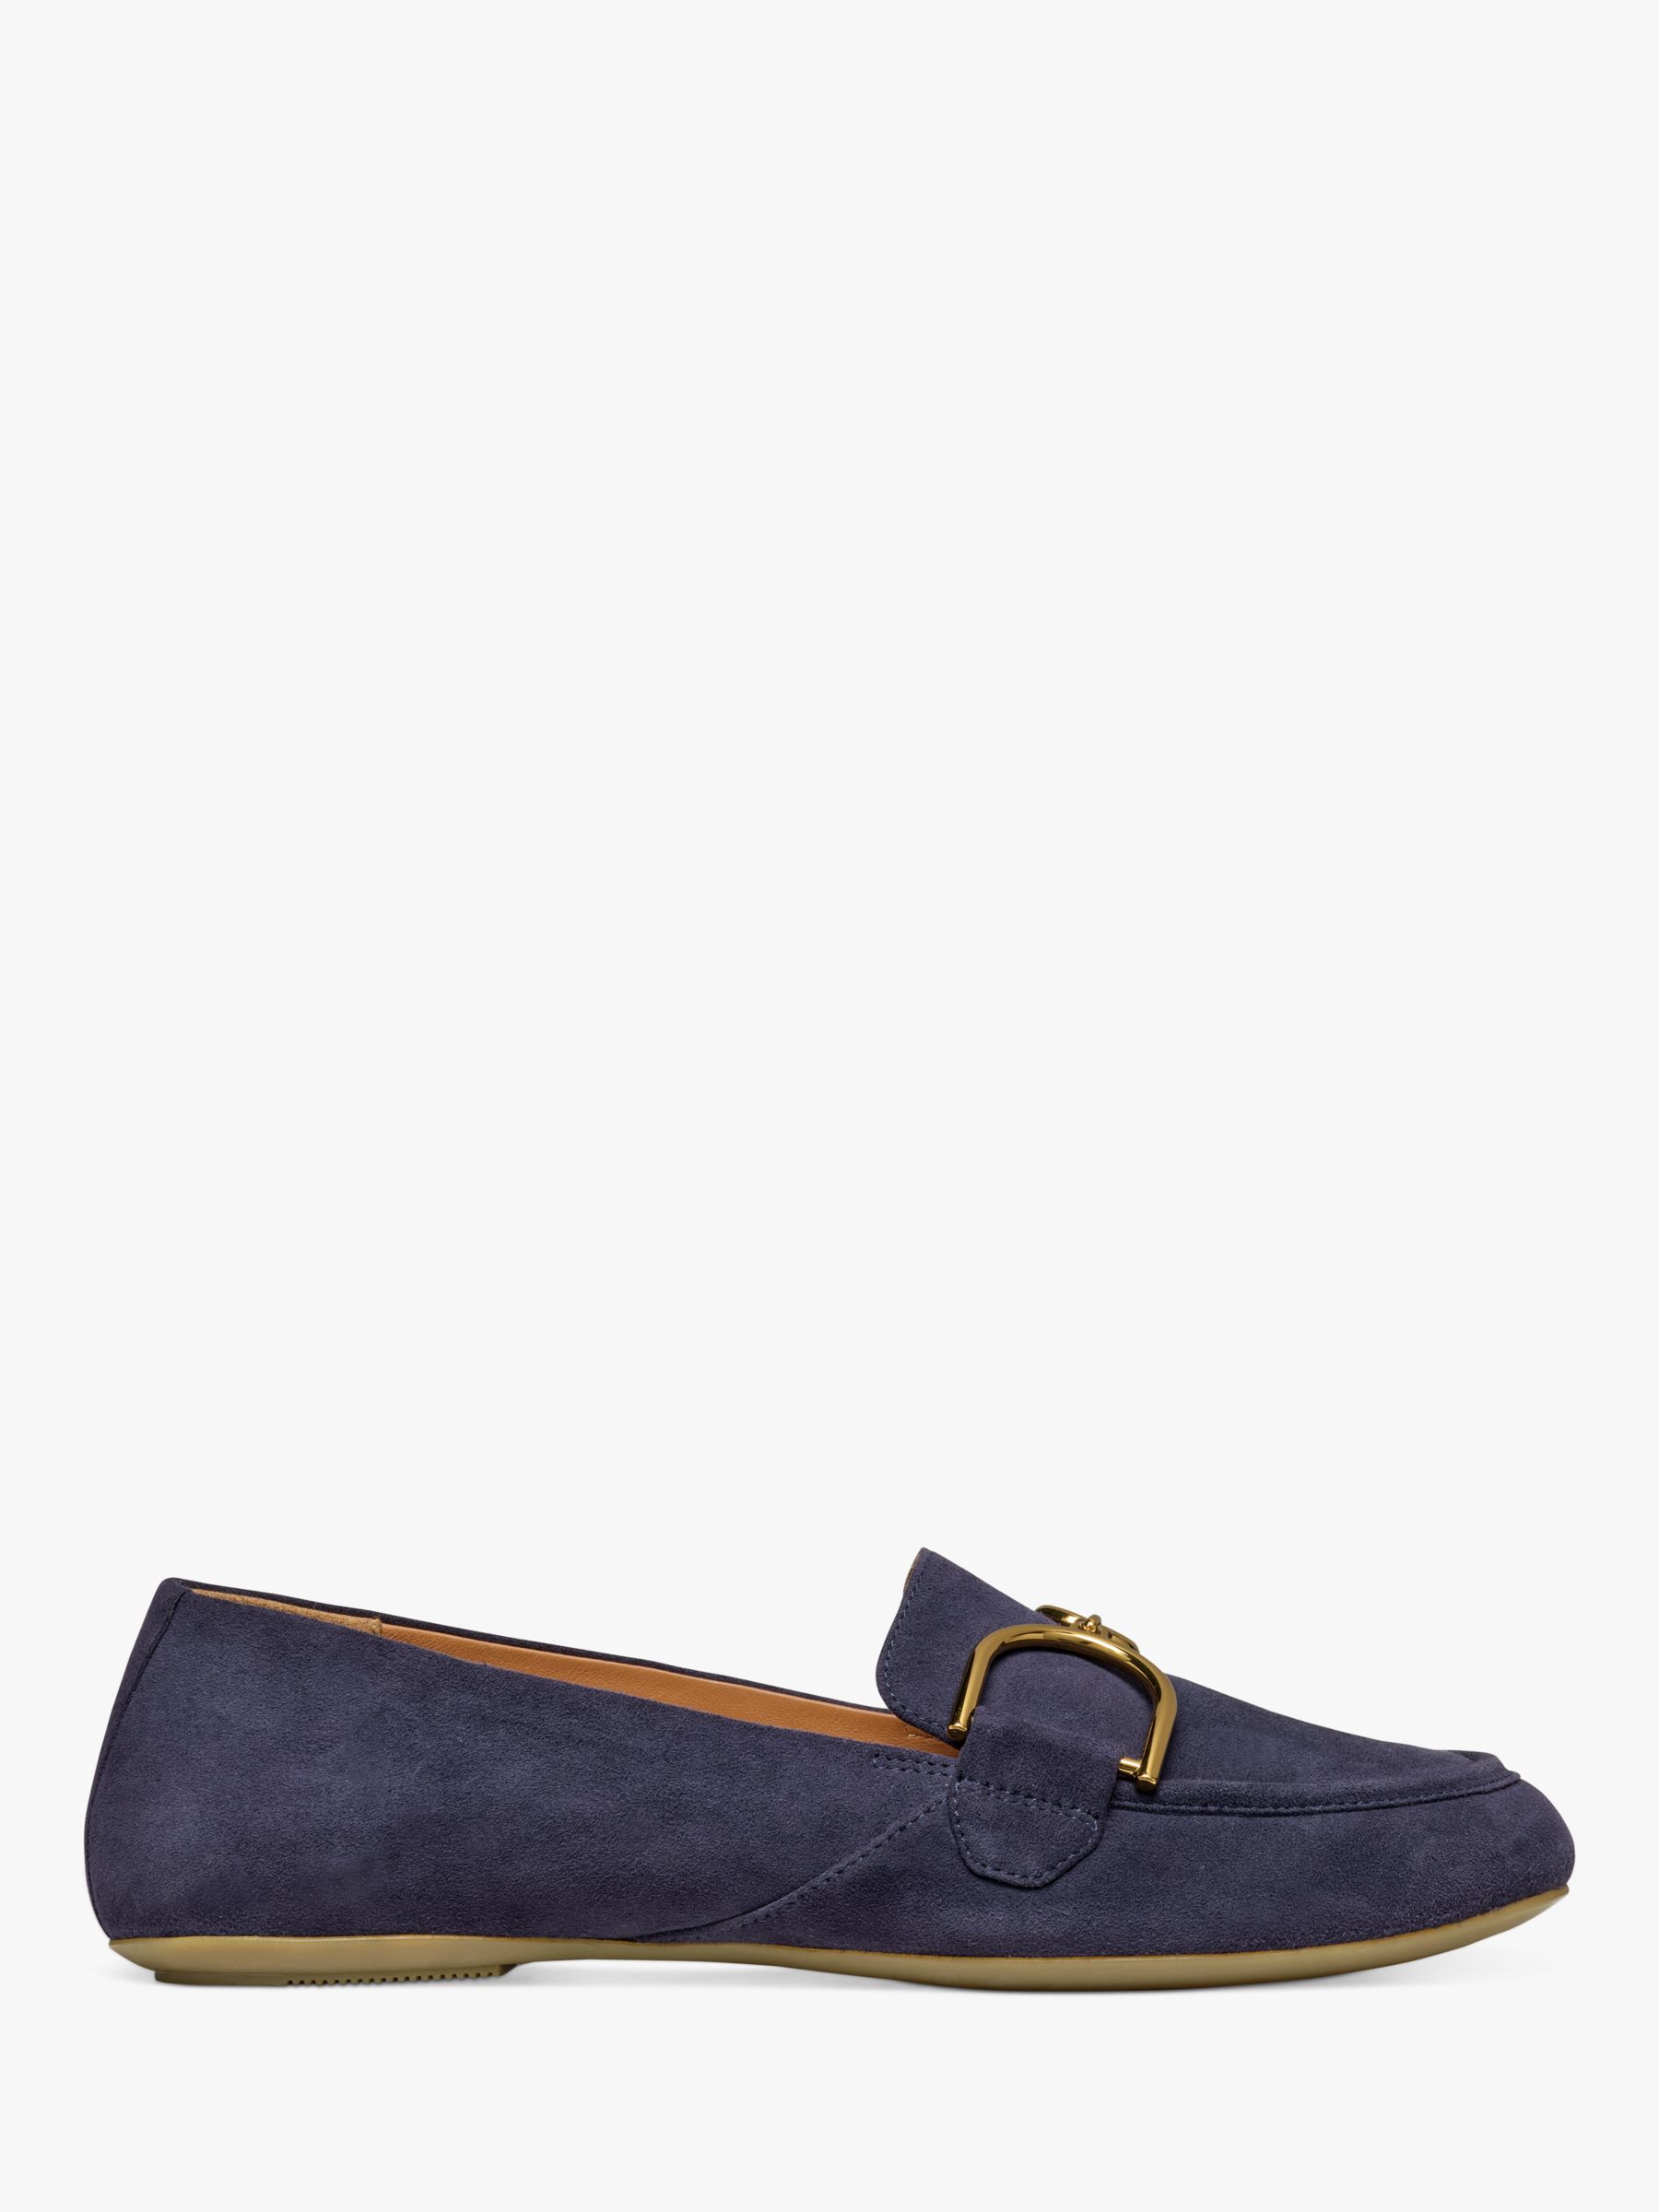 Geox Palmaria Suede Loafers, Navy, EU36.5